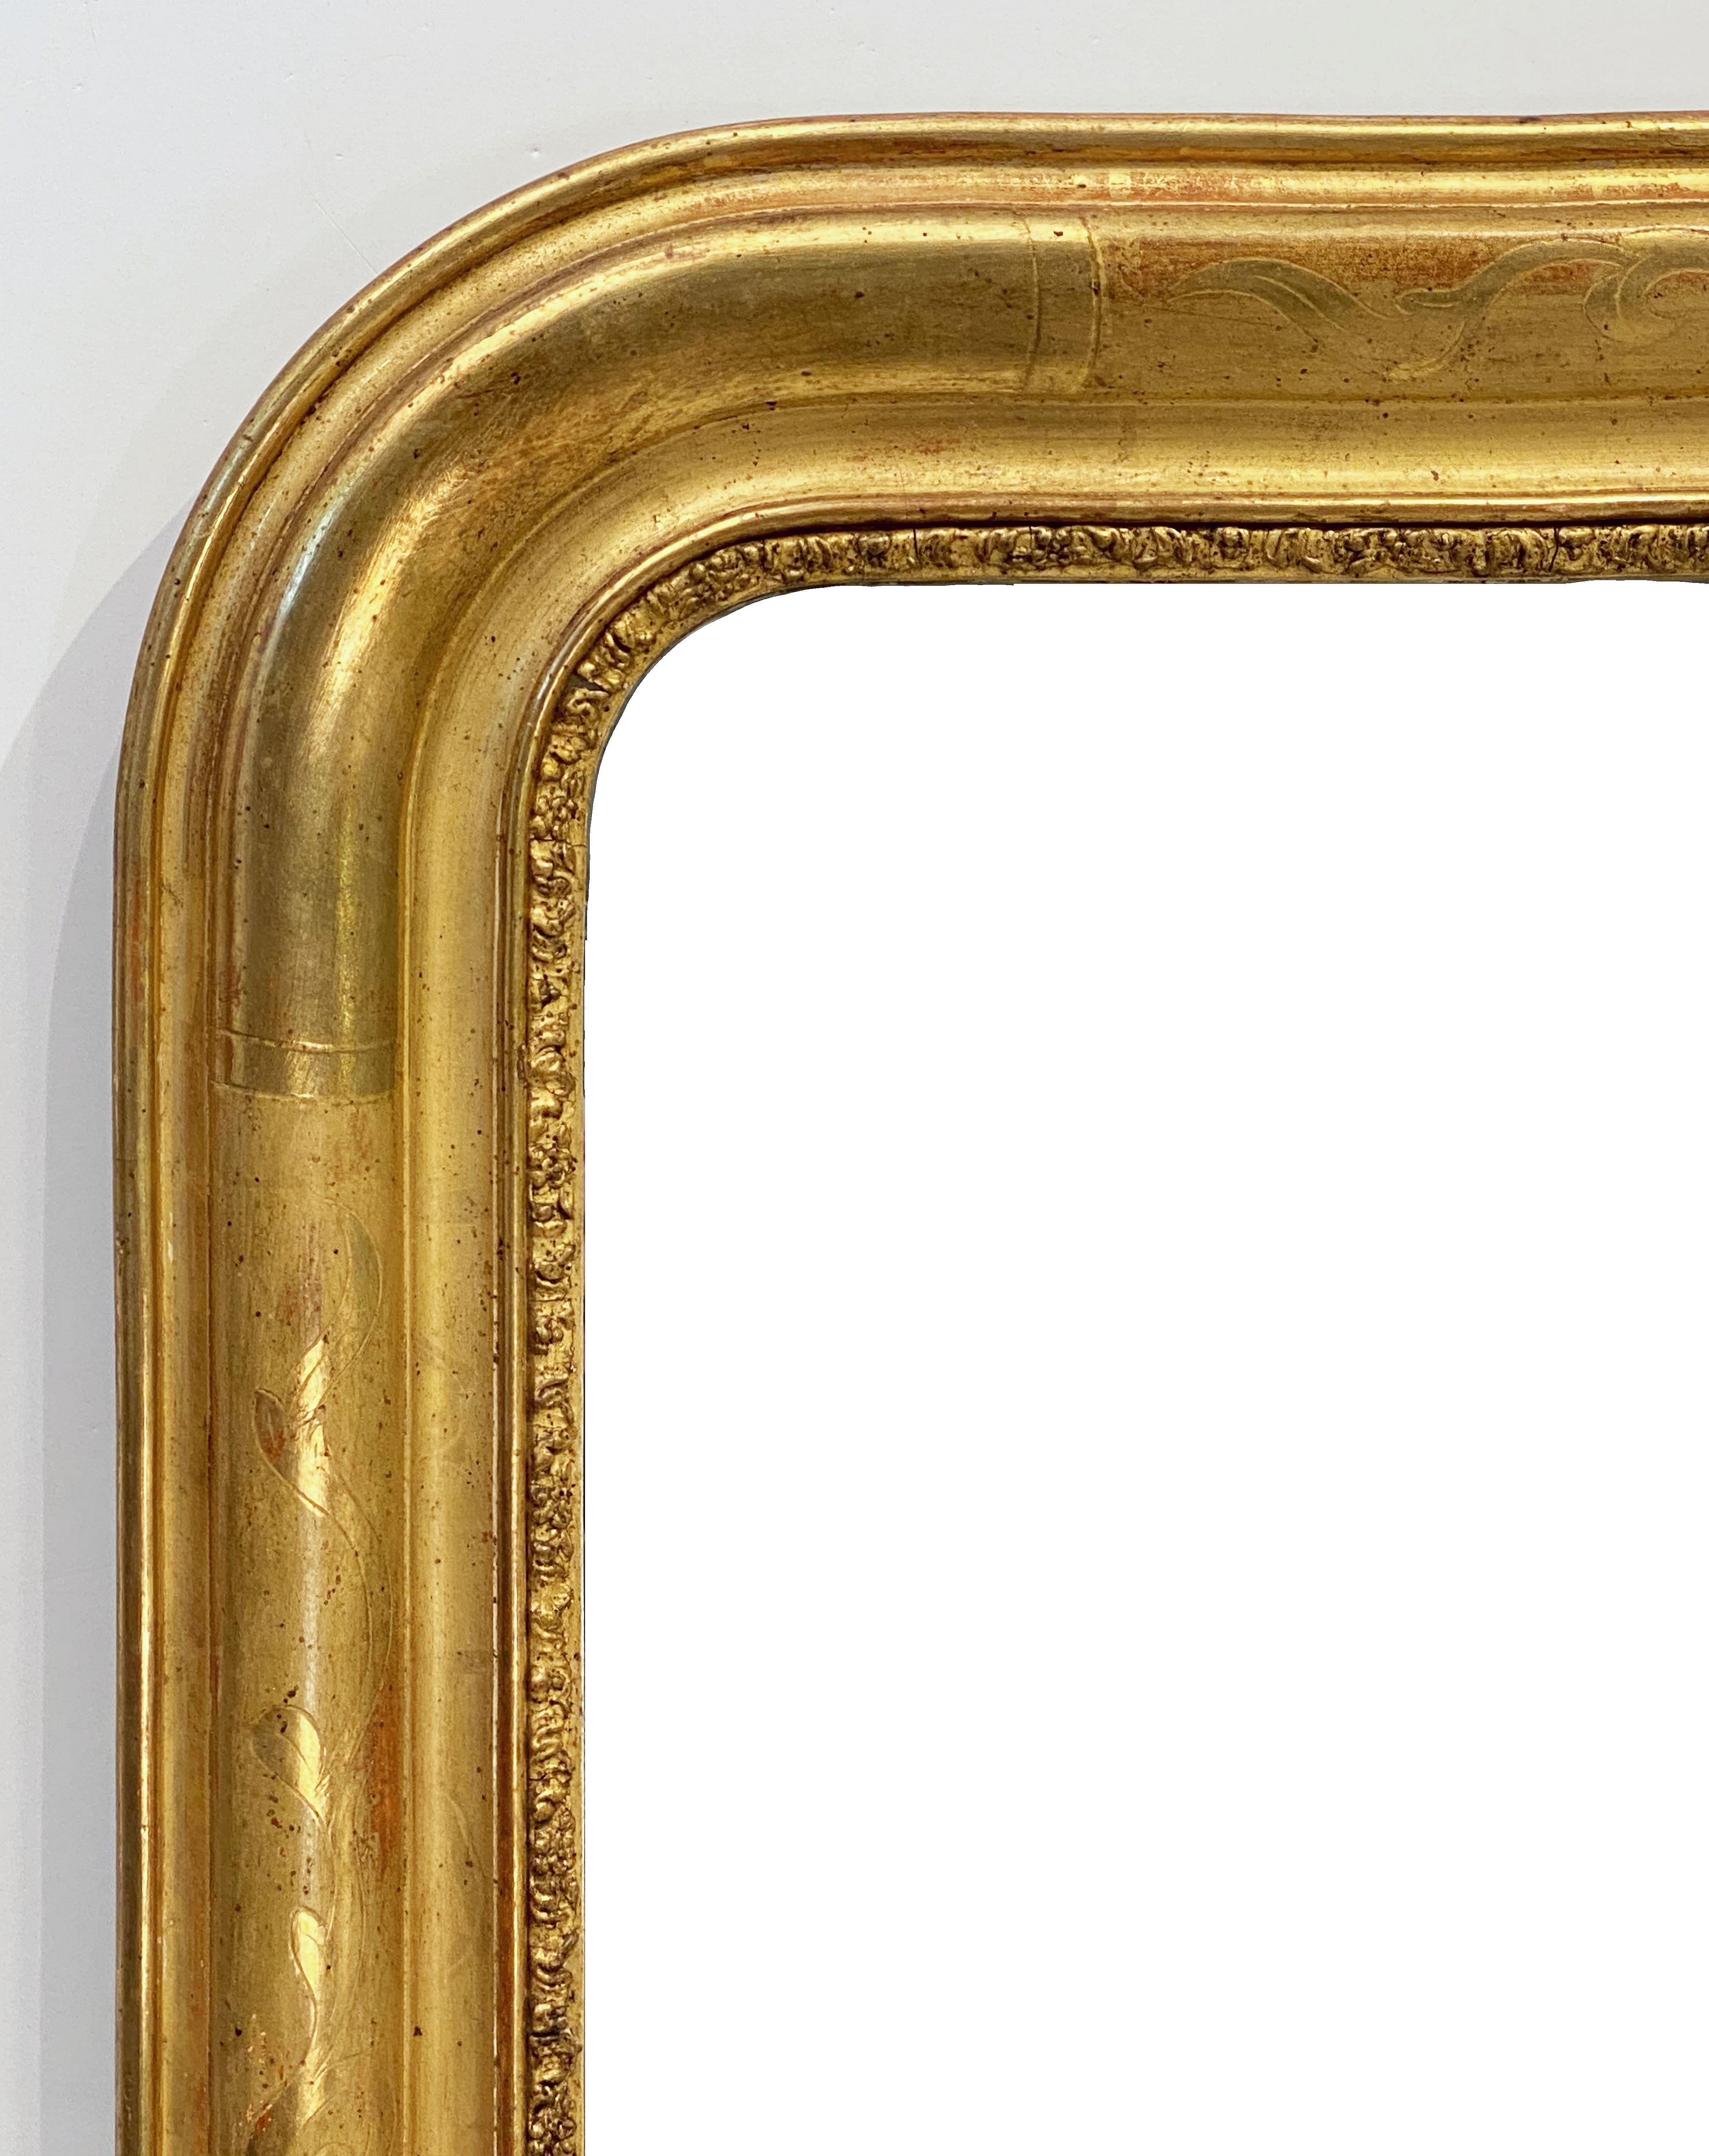 Glass Large Louis Philippe Arch Top Gilt Mirror (39 3/4 x W 25 1/8)